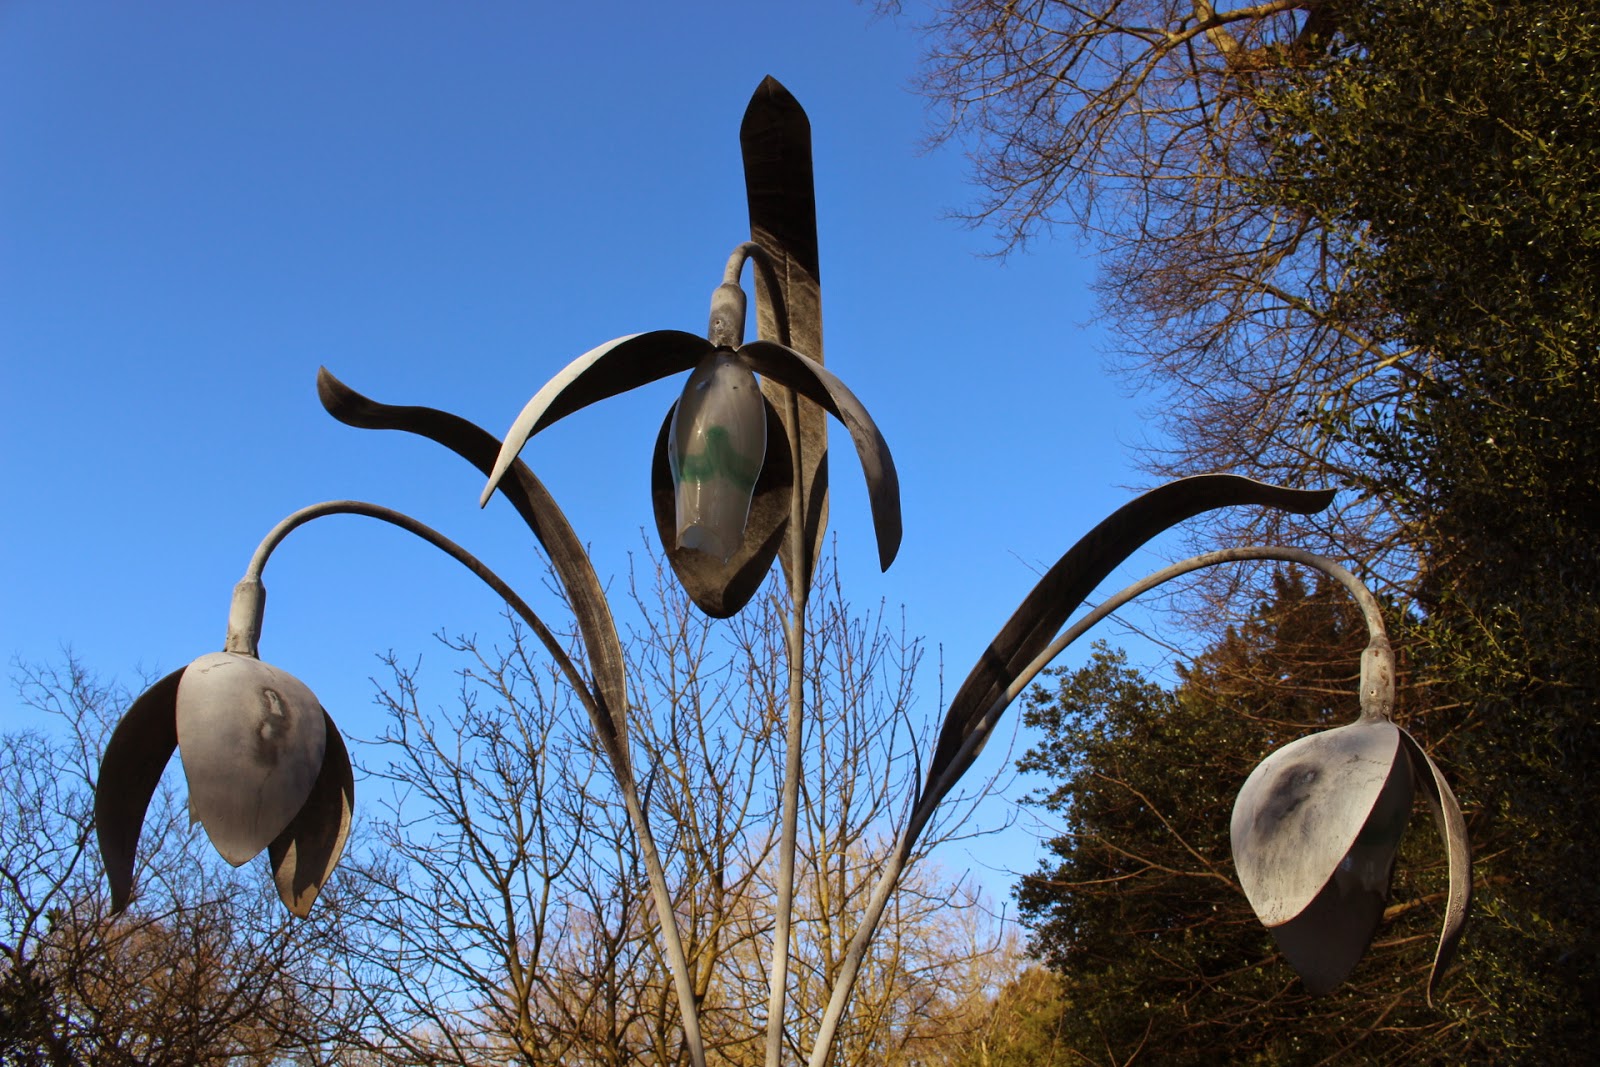 Galanthus sculpture at Lacock Abbey